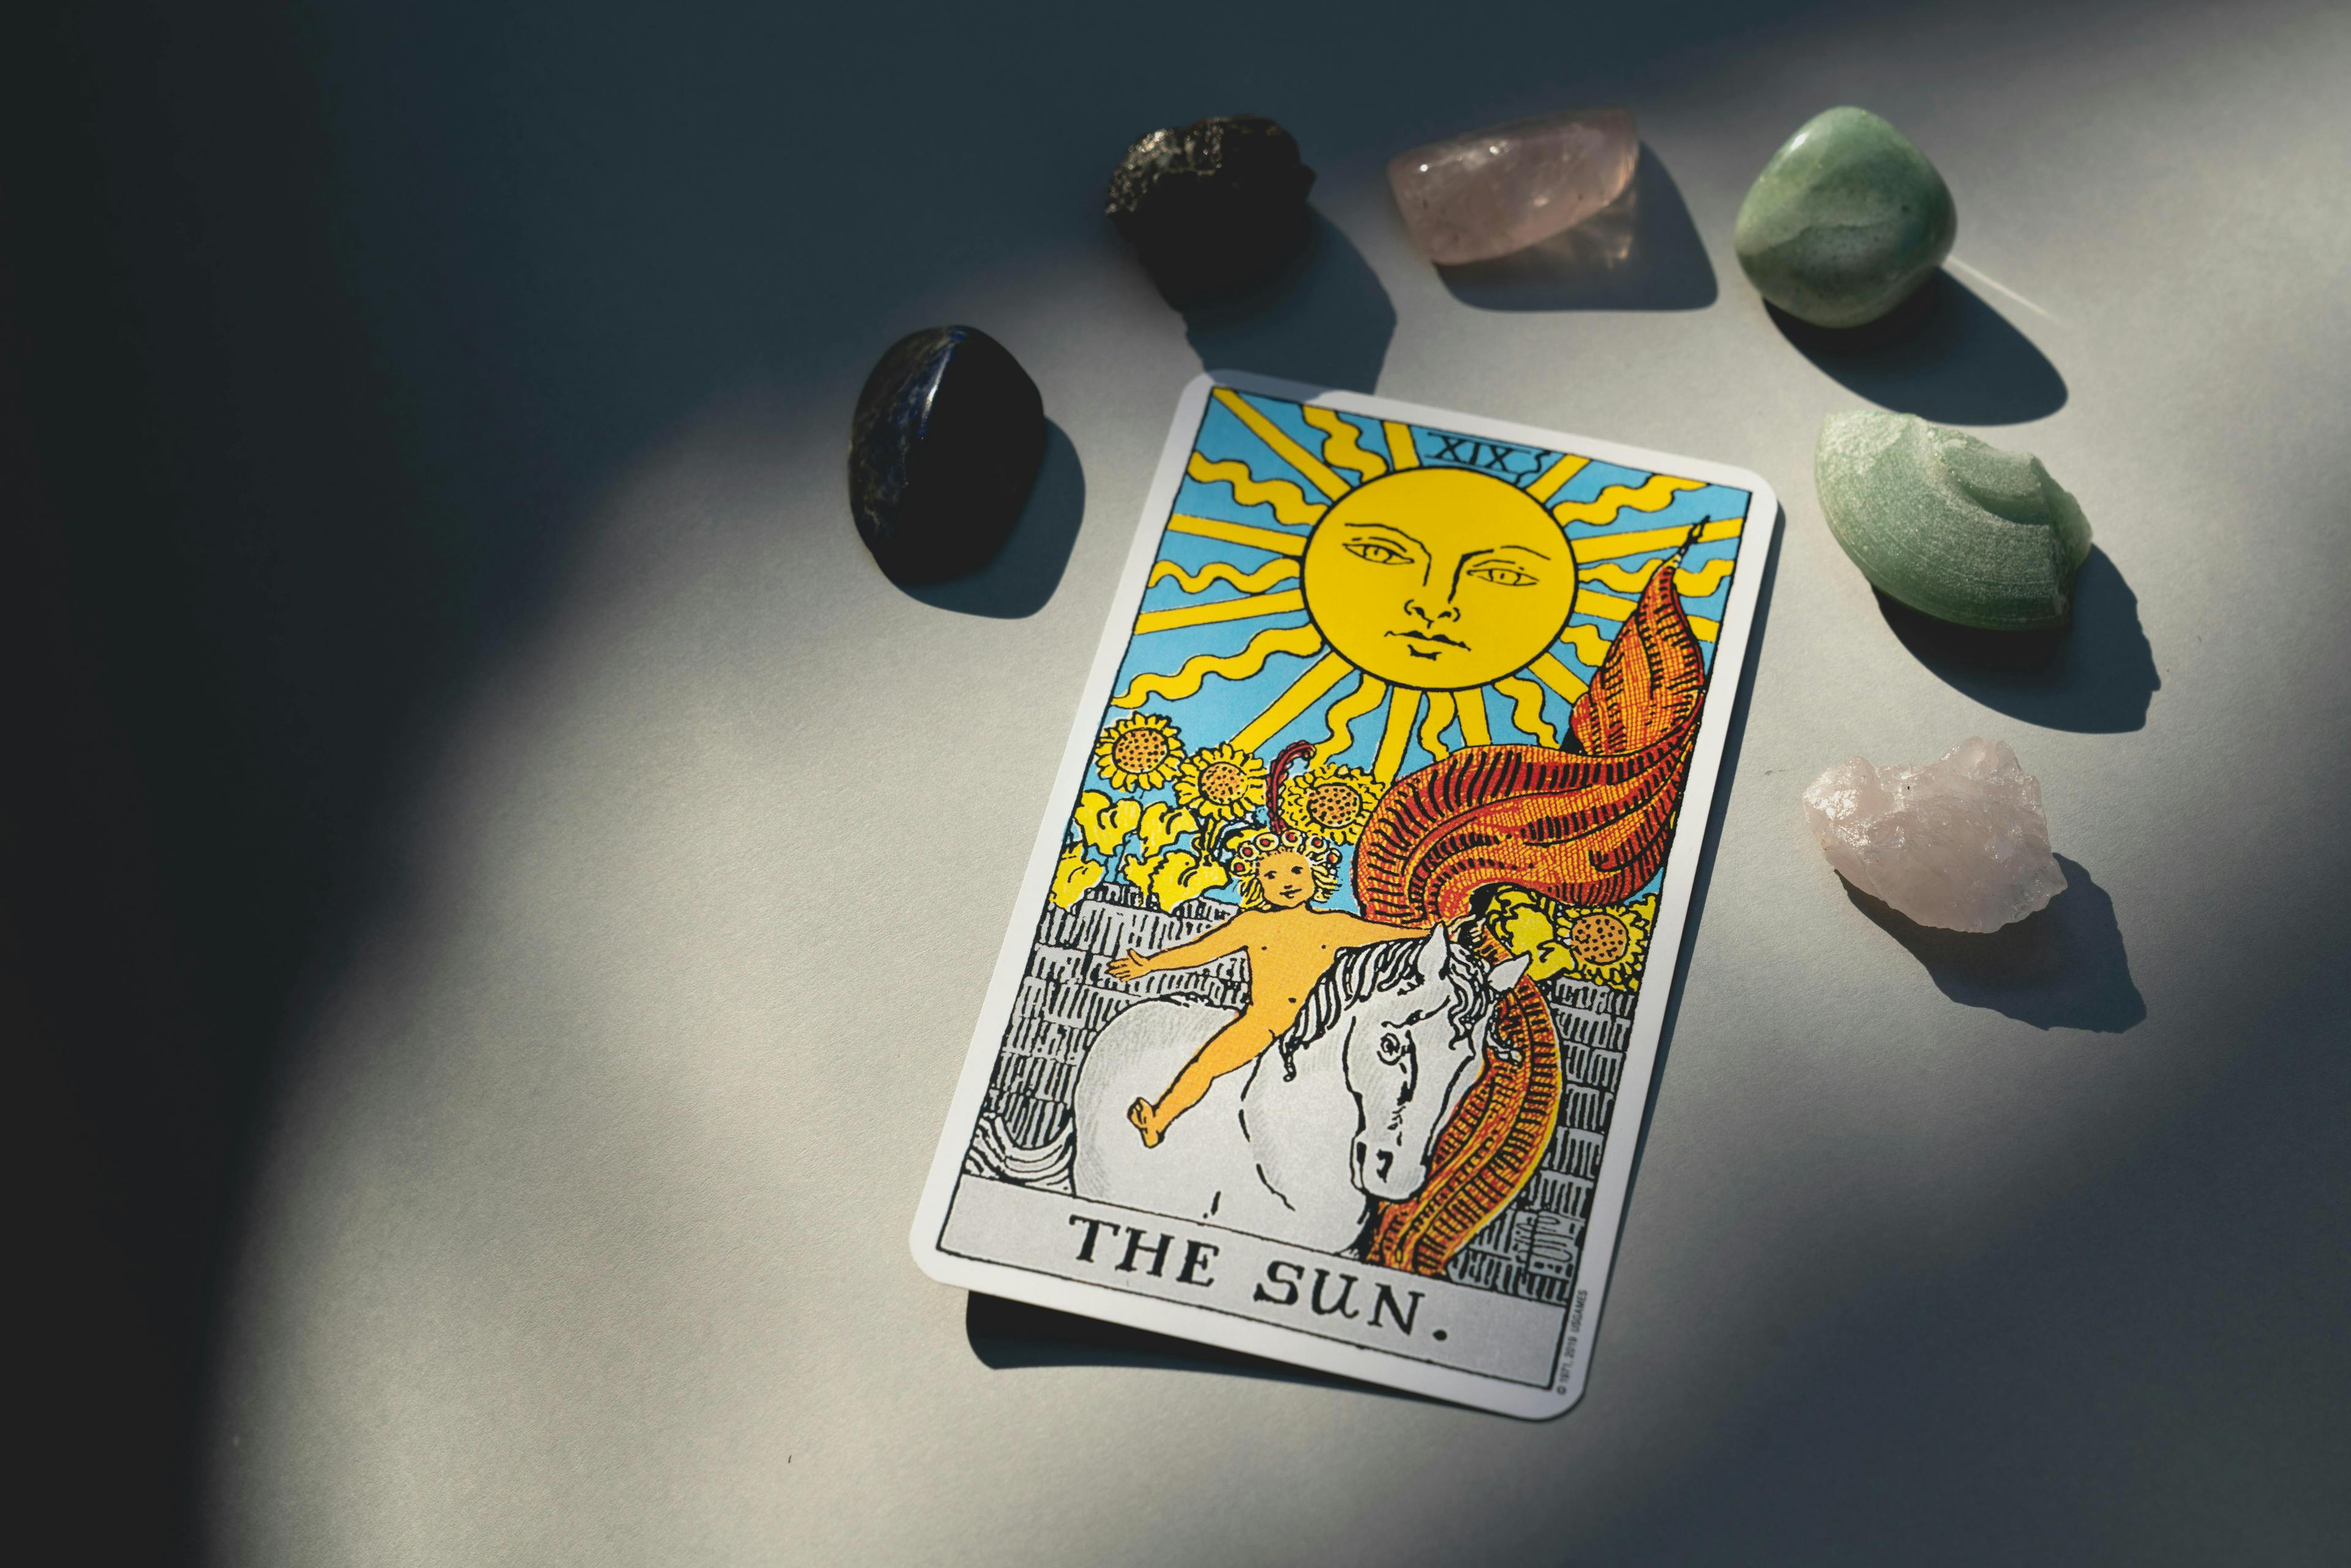 Image of a tarot card depicting the sun and surrounded by crystals.